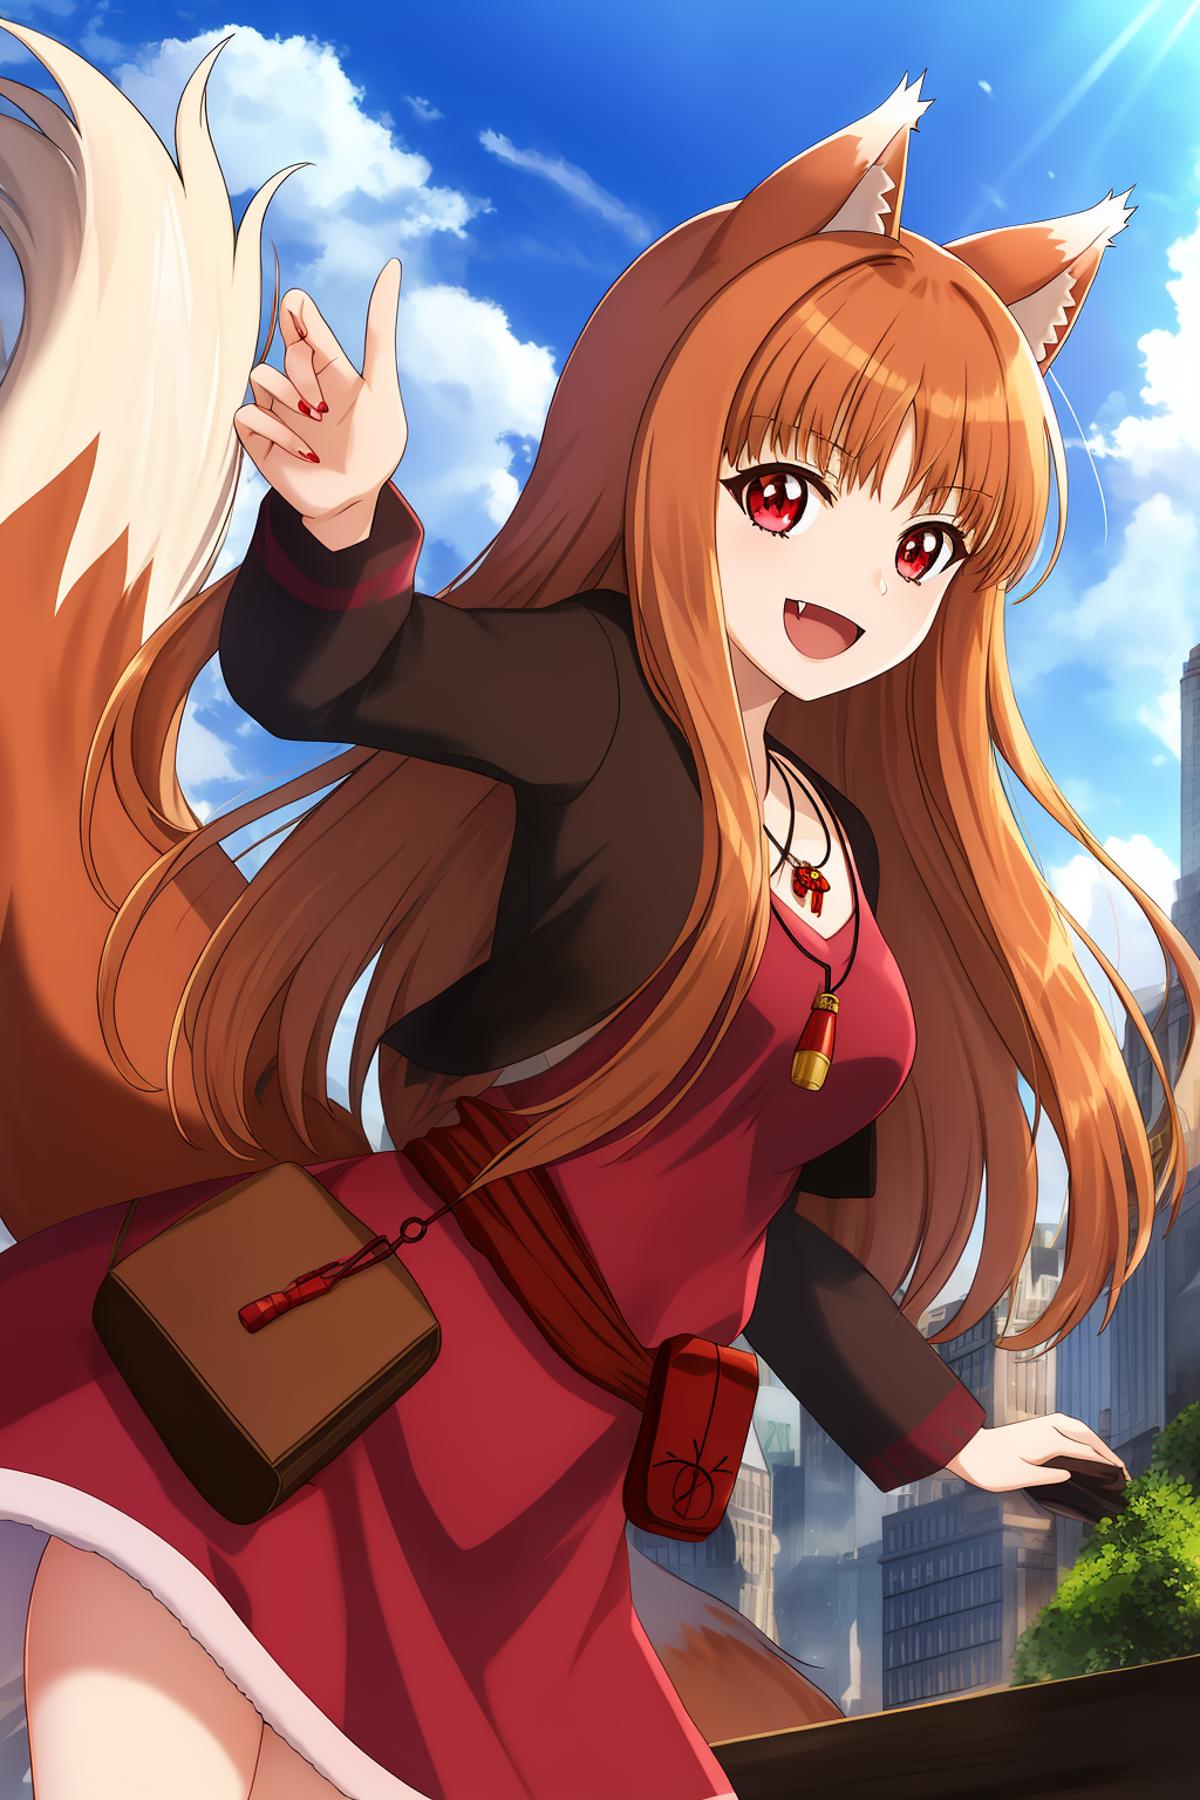 Holo - Spice and Wolf [Request] image by SysDeep